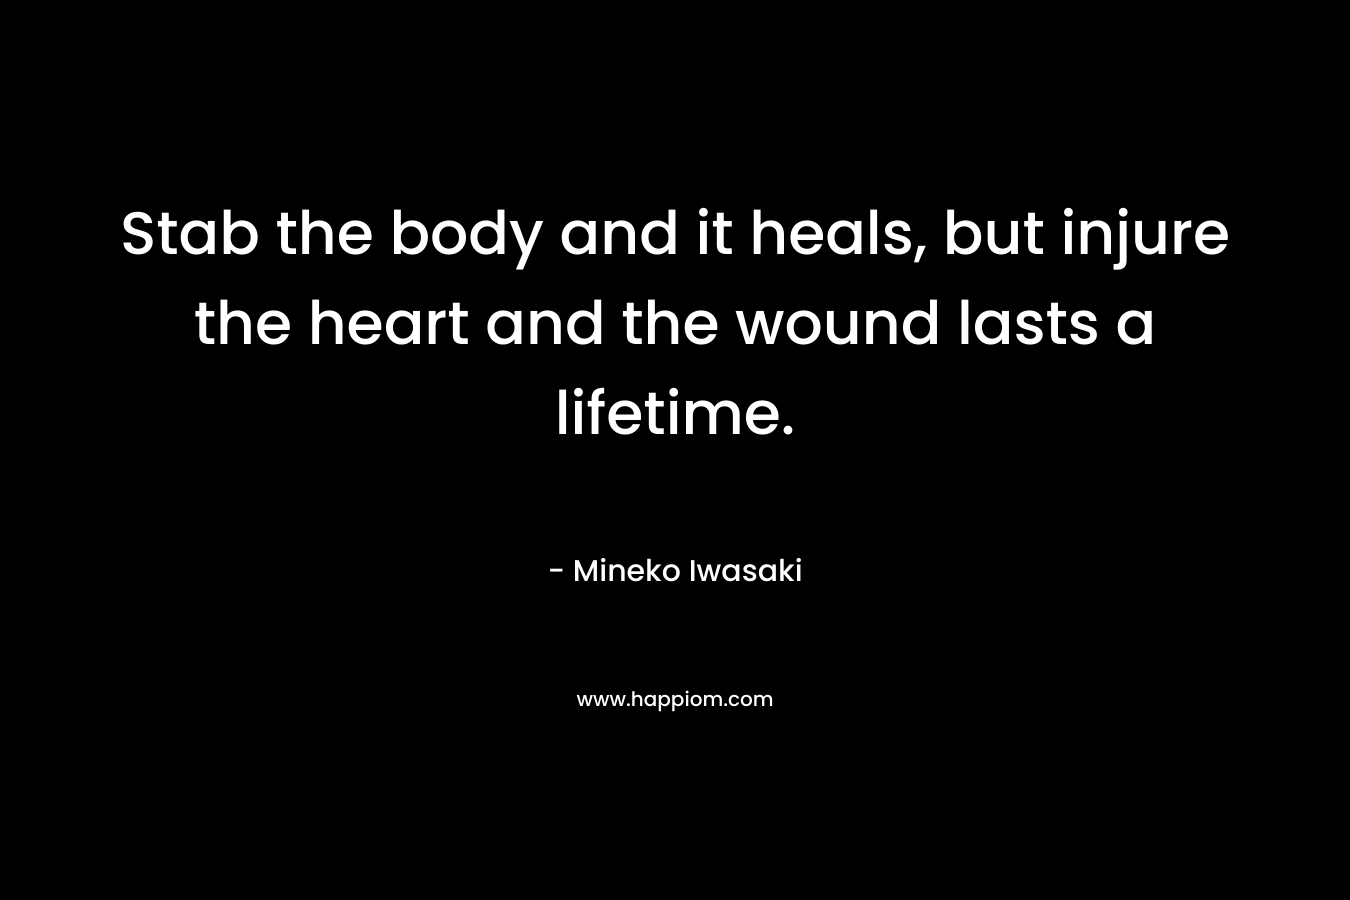 Stab the body and it heals, but injure the heart and the wound lasts a lifetime. – Mineko Iwasaki